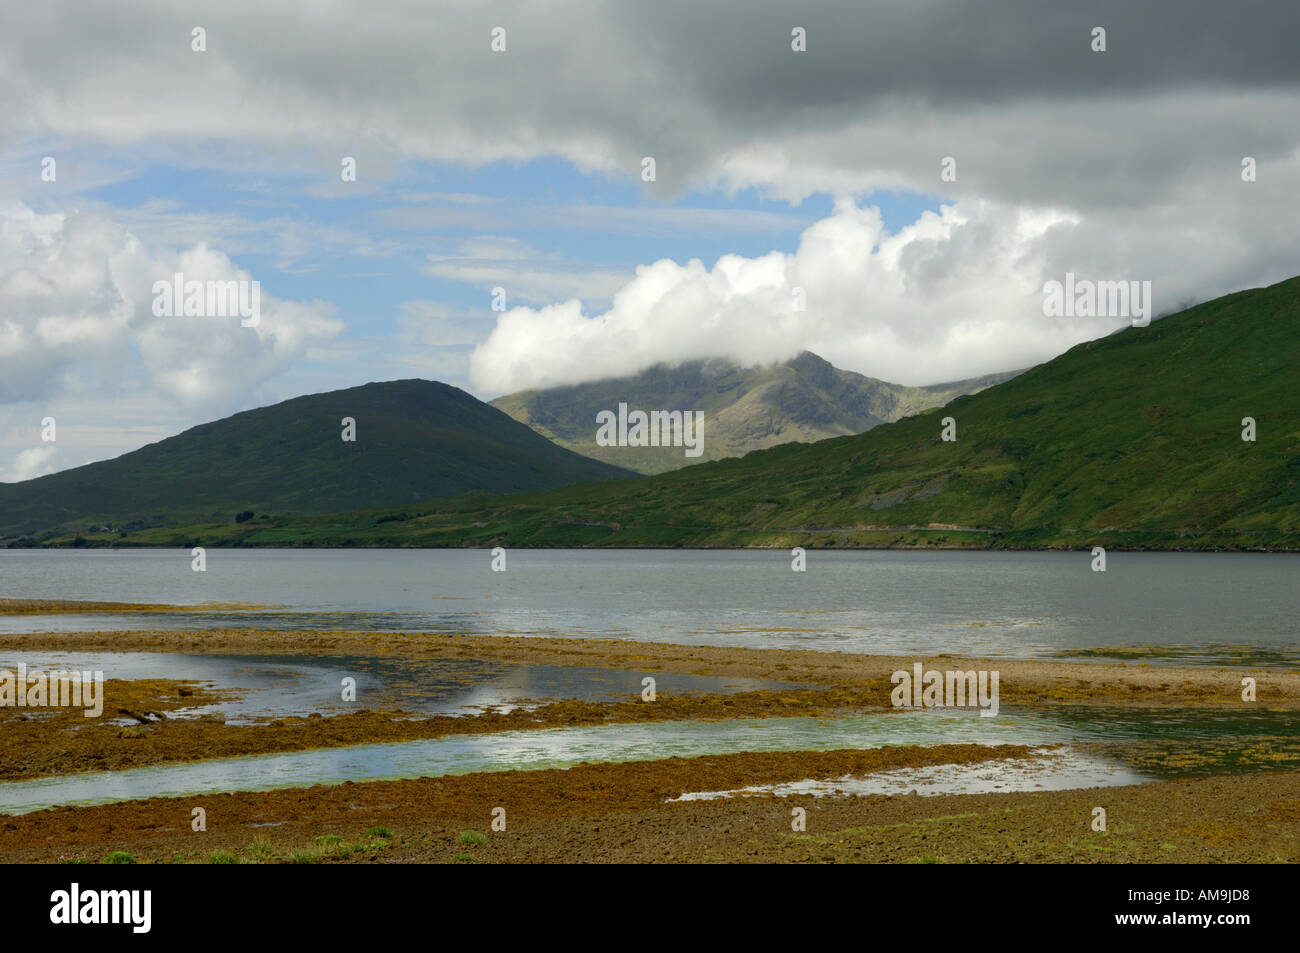 Northwest across Killary Harbour from the village of Leenaun in County Galway to the Mweelrea Mountains in County Mayo, Ireland. Stock Photo